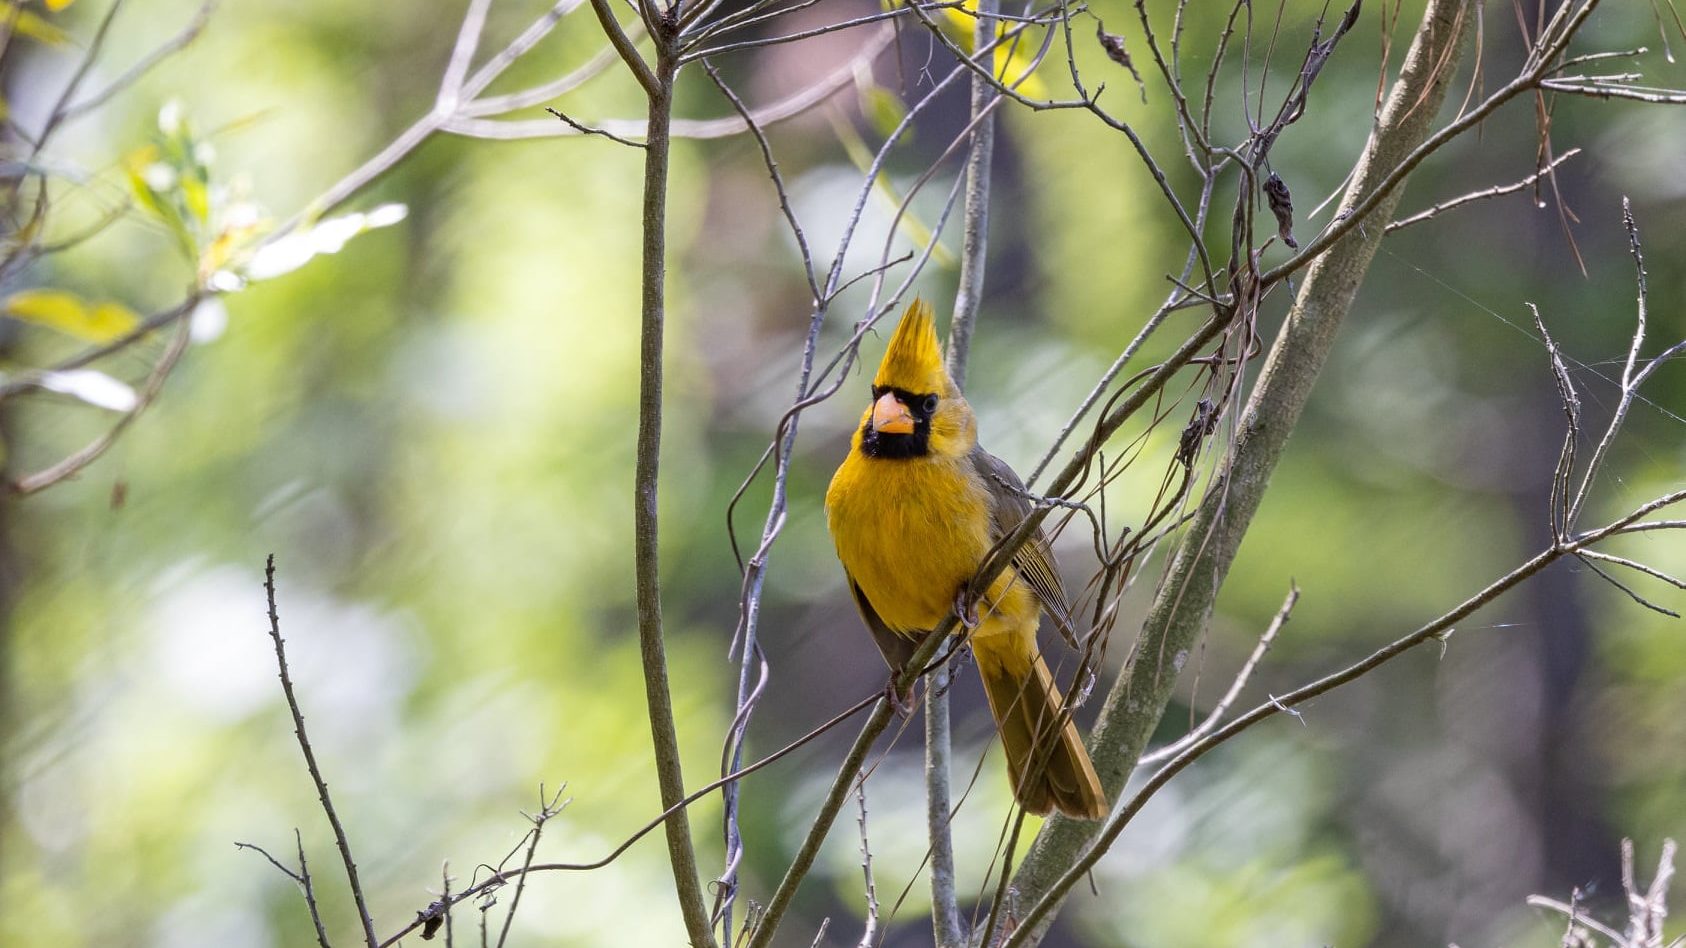 Rare yellow cardinal spotted in Florida woods